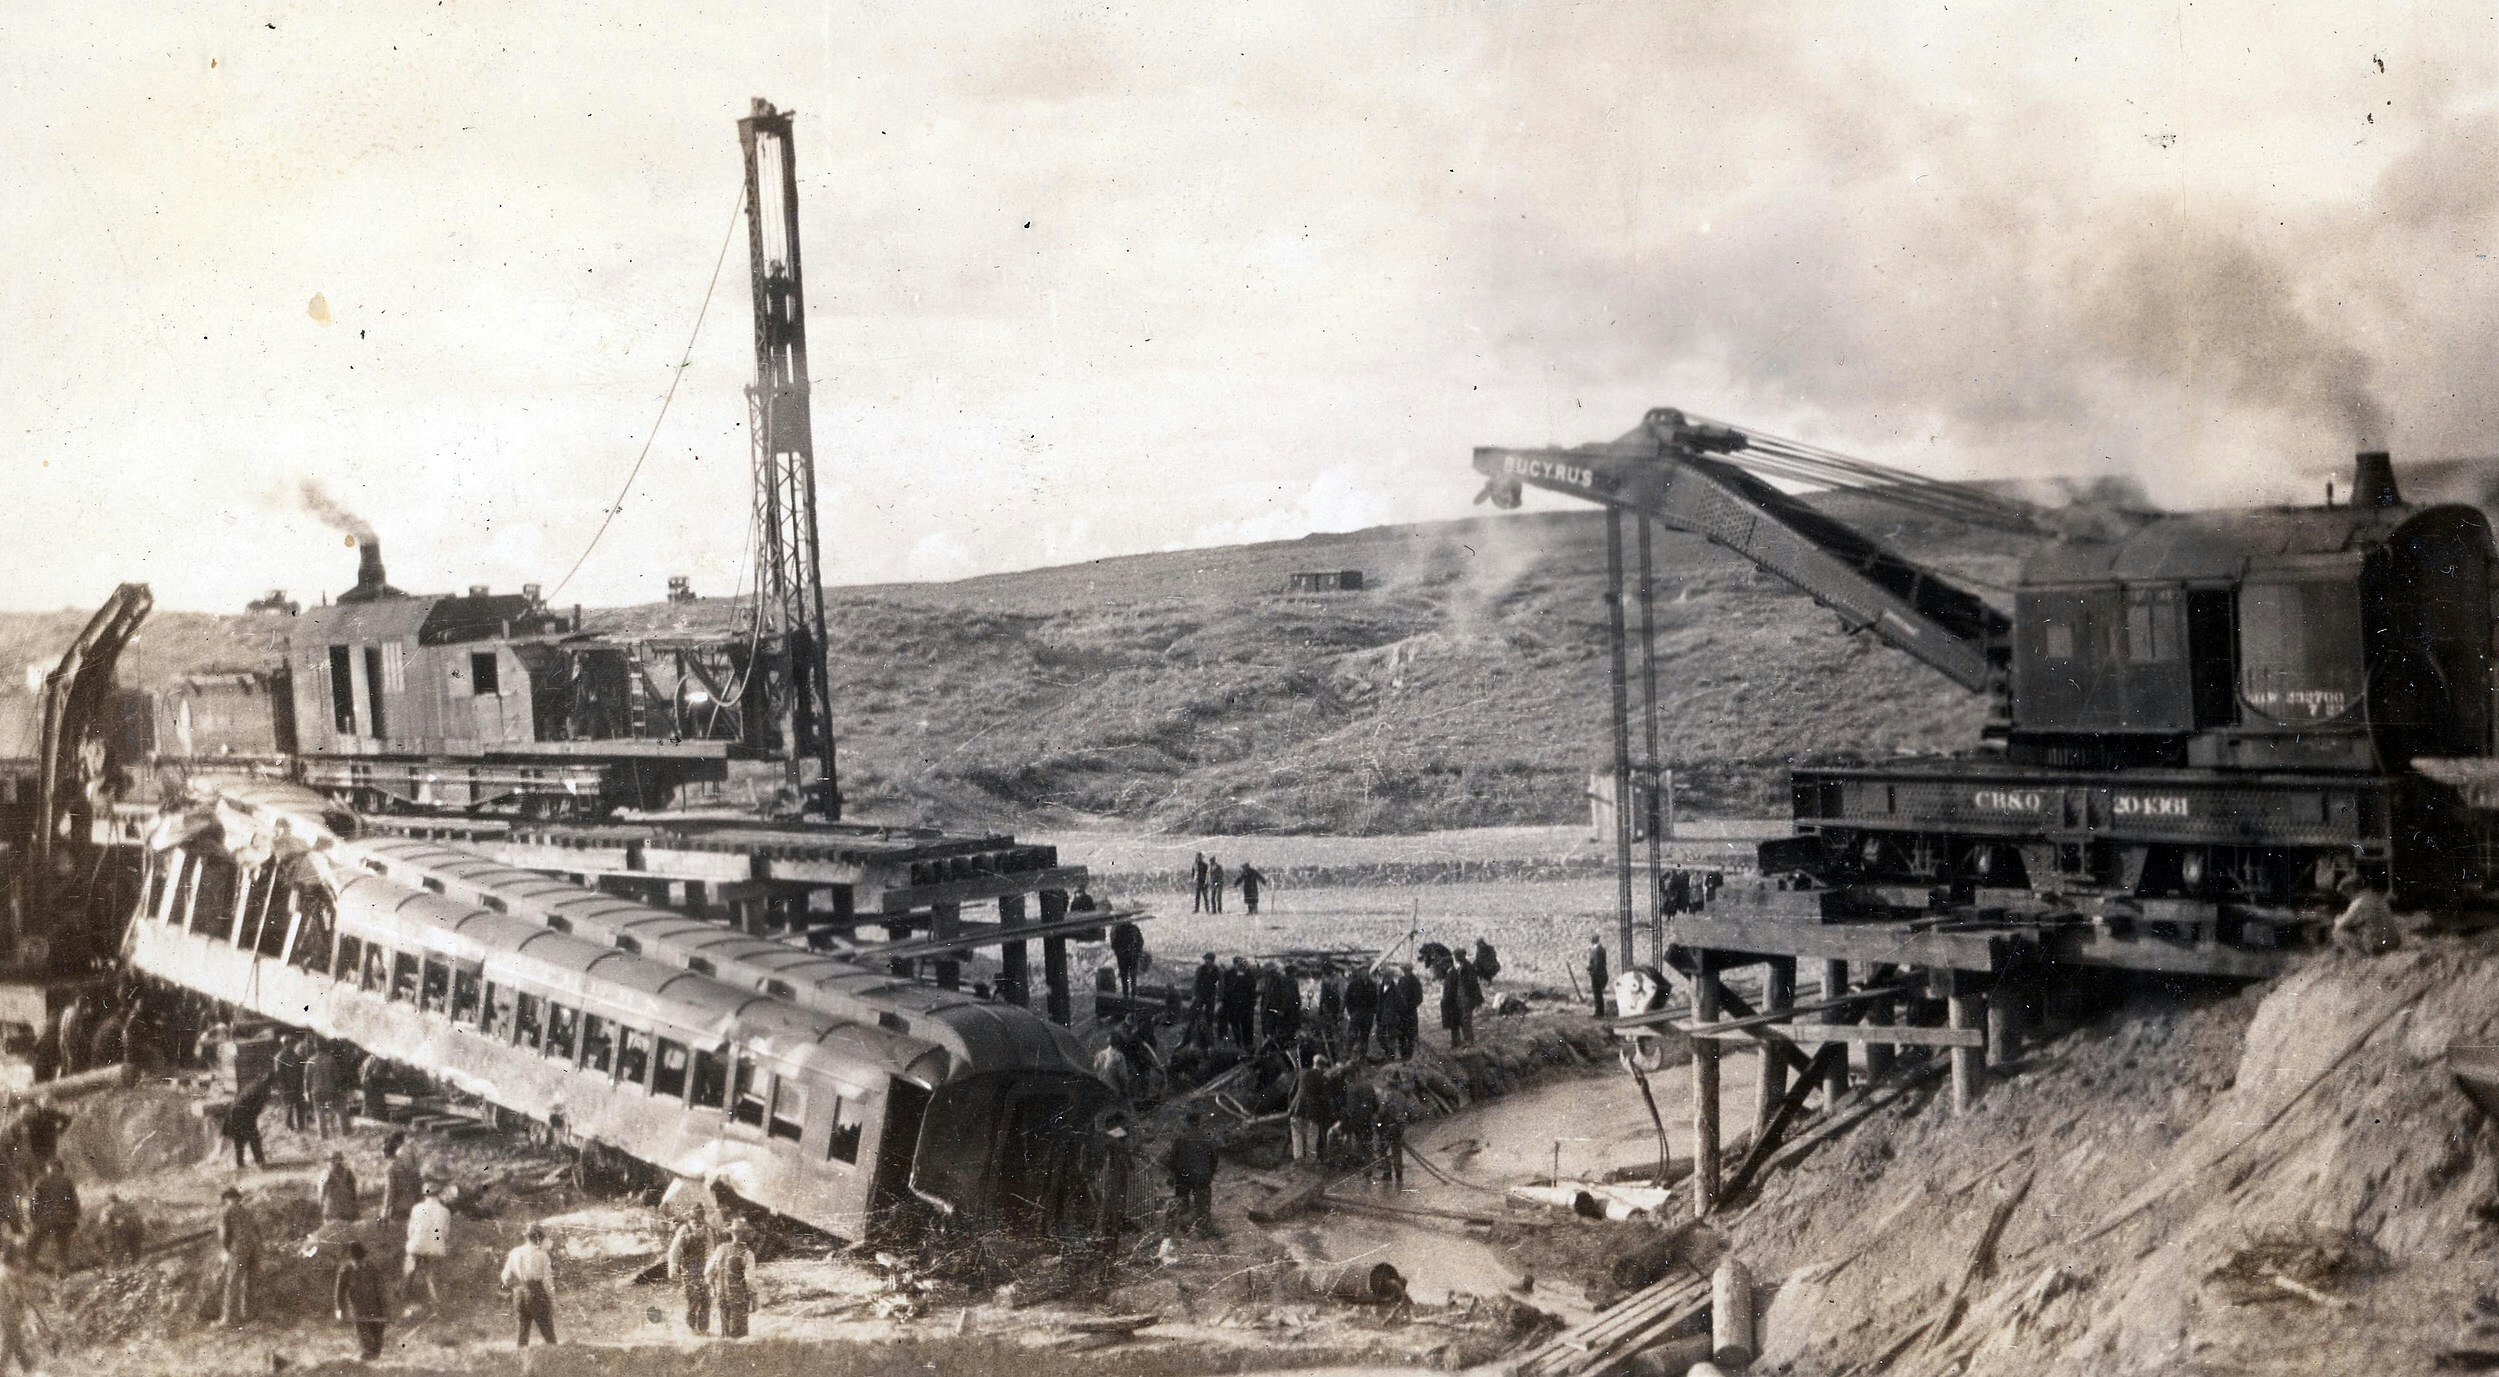 Crews work to recover the wrecked train that plunged into Cole Creek in 1923, killing dozens.